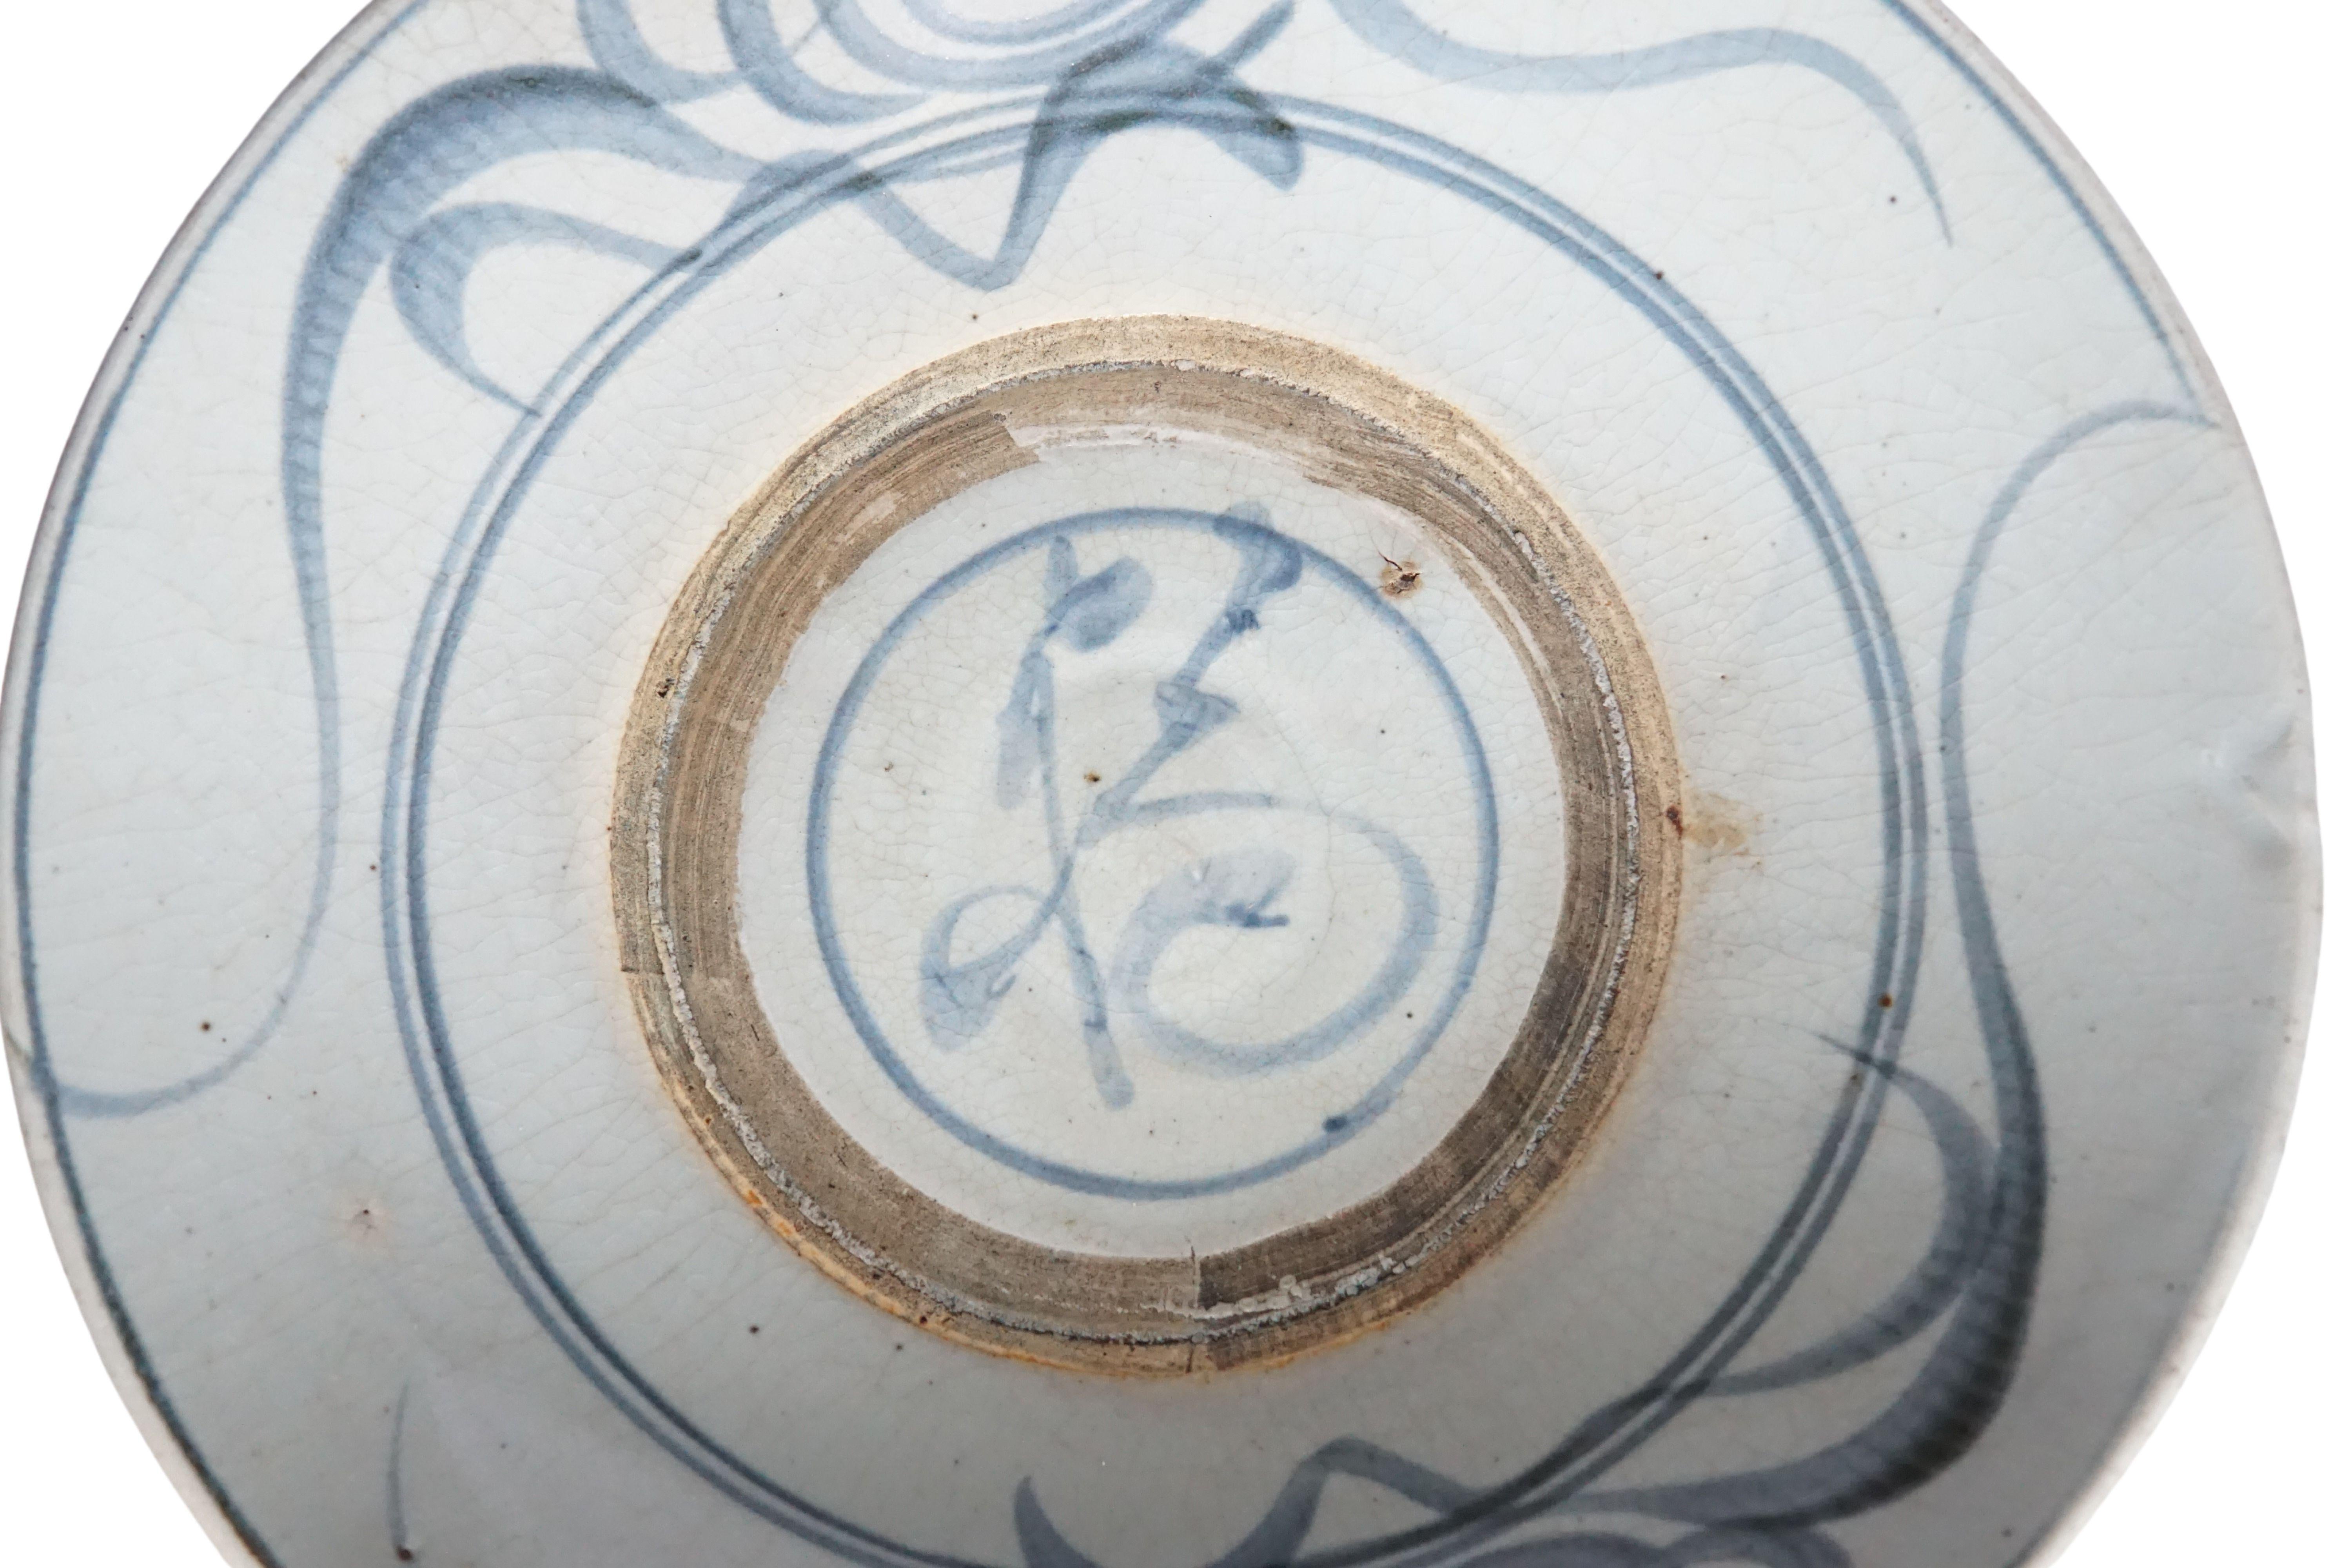 Glazed Qing Dynasty Chinese Blue & White Porcelain Plate with Hand-Painted Strokes  For Sale